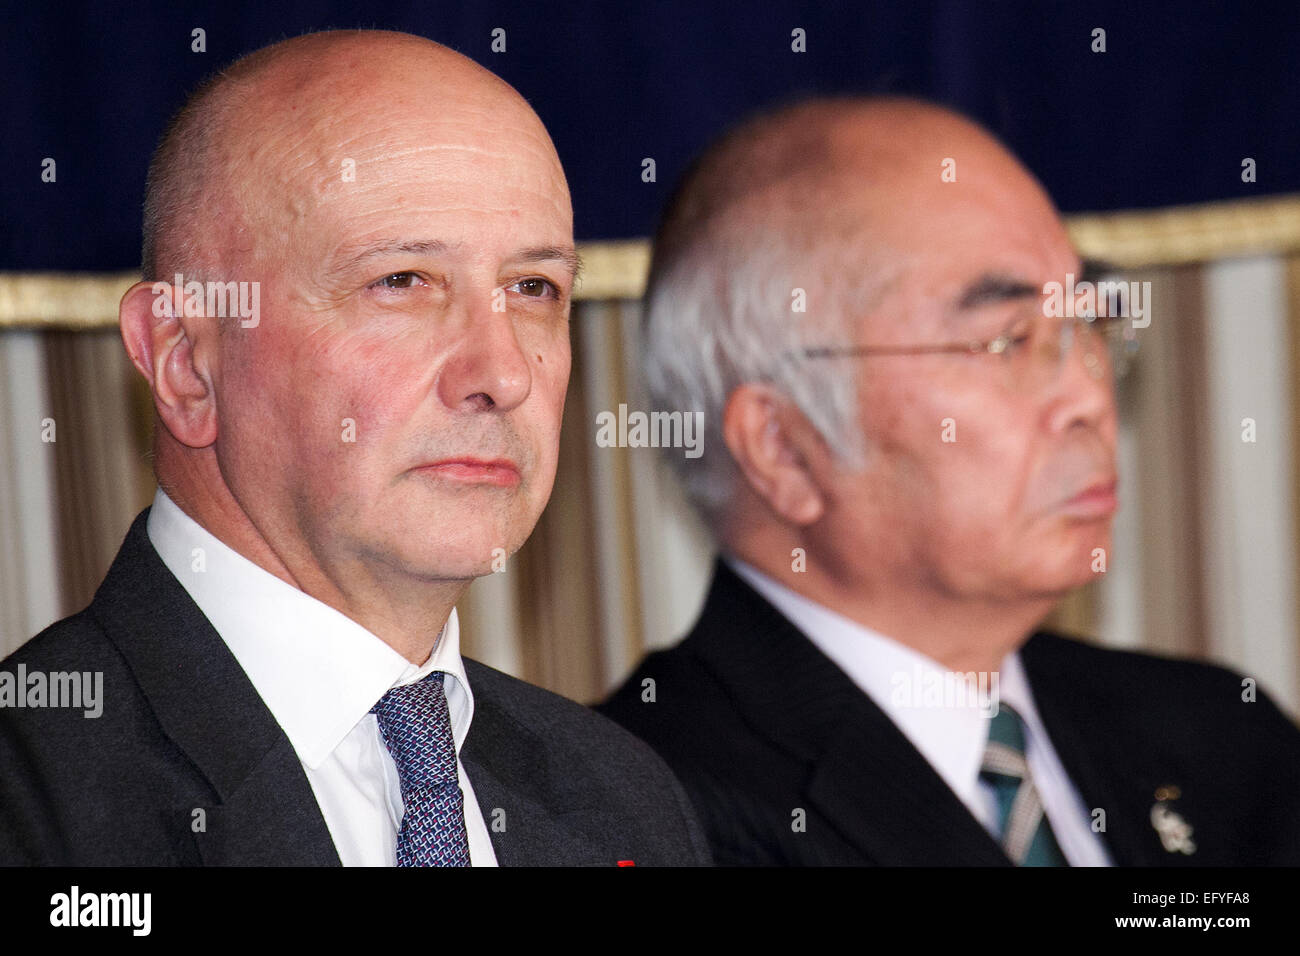 (L to R) Jean-Louis Bancel, Akira Banzai, February 12, 2015, Tokyo, Japan : (L to R) Jean-Louis Bancel member of the board of the ICA and Akira Banzai President of the Central Union of Agricultural Co-operatives (JA Zenchu) attend a press conference at the Foreign Correspondents' Club of Japan. Banzai spoke about the organization's position after accept the Japanese Government's farm cooperative structure reform on Monday. Dame Pauline Green President of the International Co-operative Alliance and Bancel visited Japan to discuss Japan's agricultural reforms which will be crucial for the Trans- Stock Photo